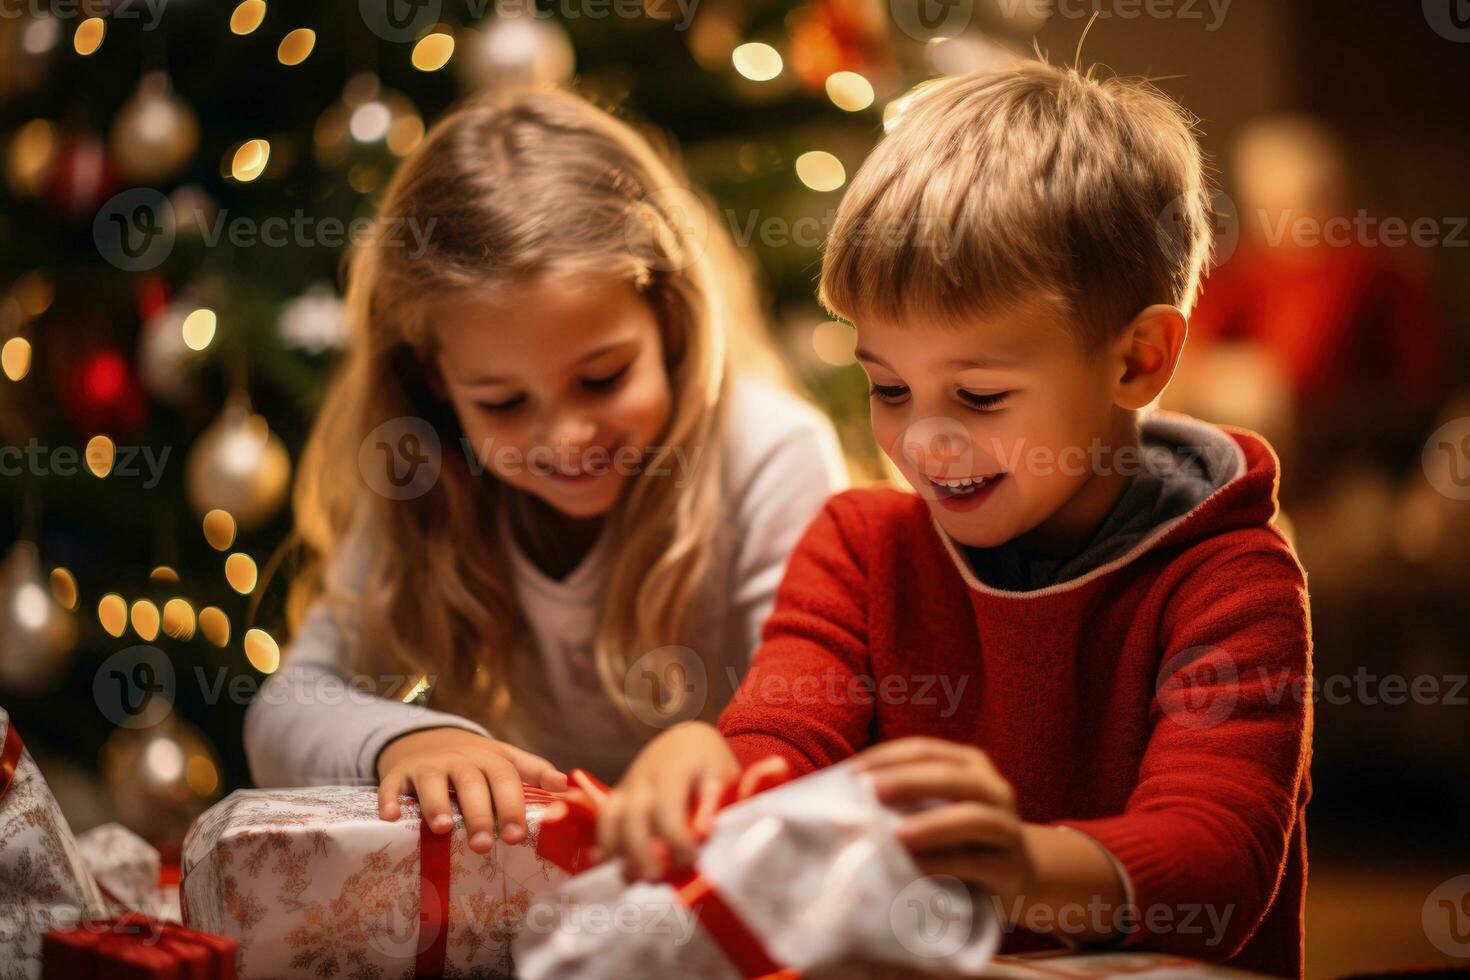 Children joyfully unwrapping 90s vintage gifts under a festive Christmas tree photo